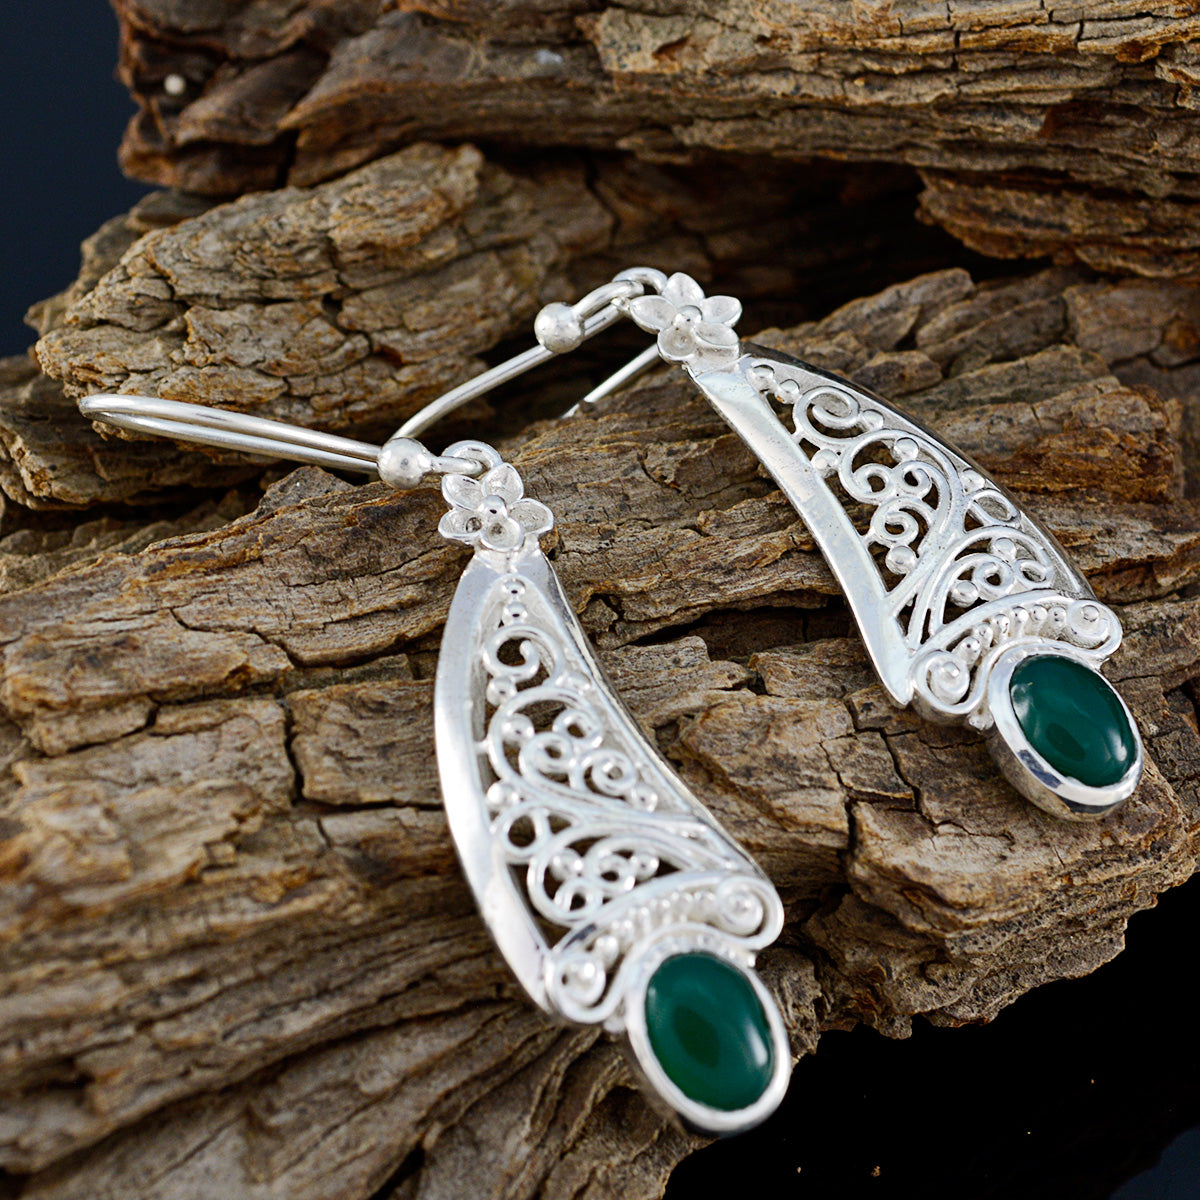 Riyo Real Gemstones oval Cabochon Green Onyx Silver Earrings gift for Faishonable day